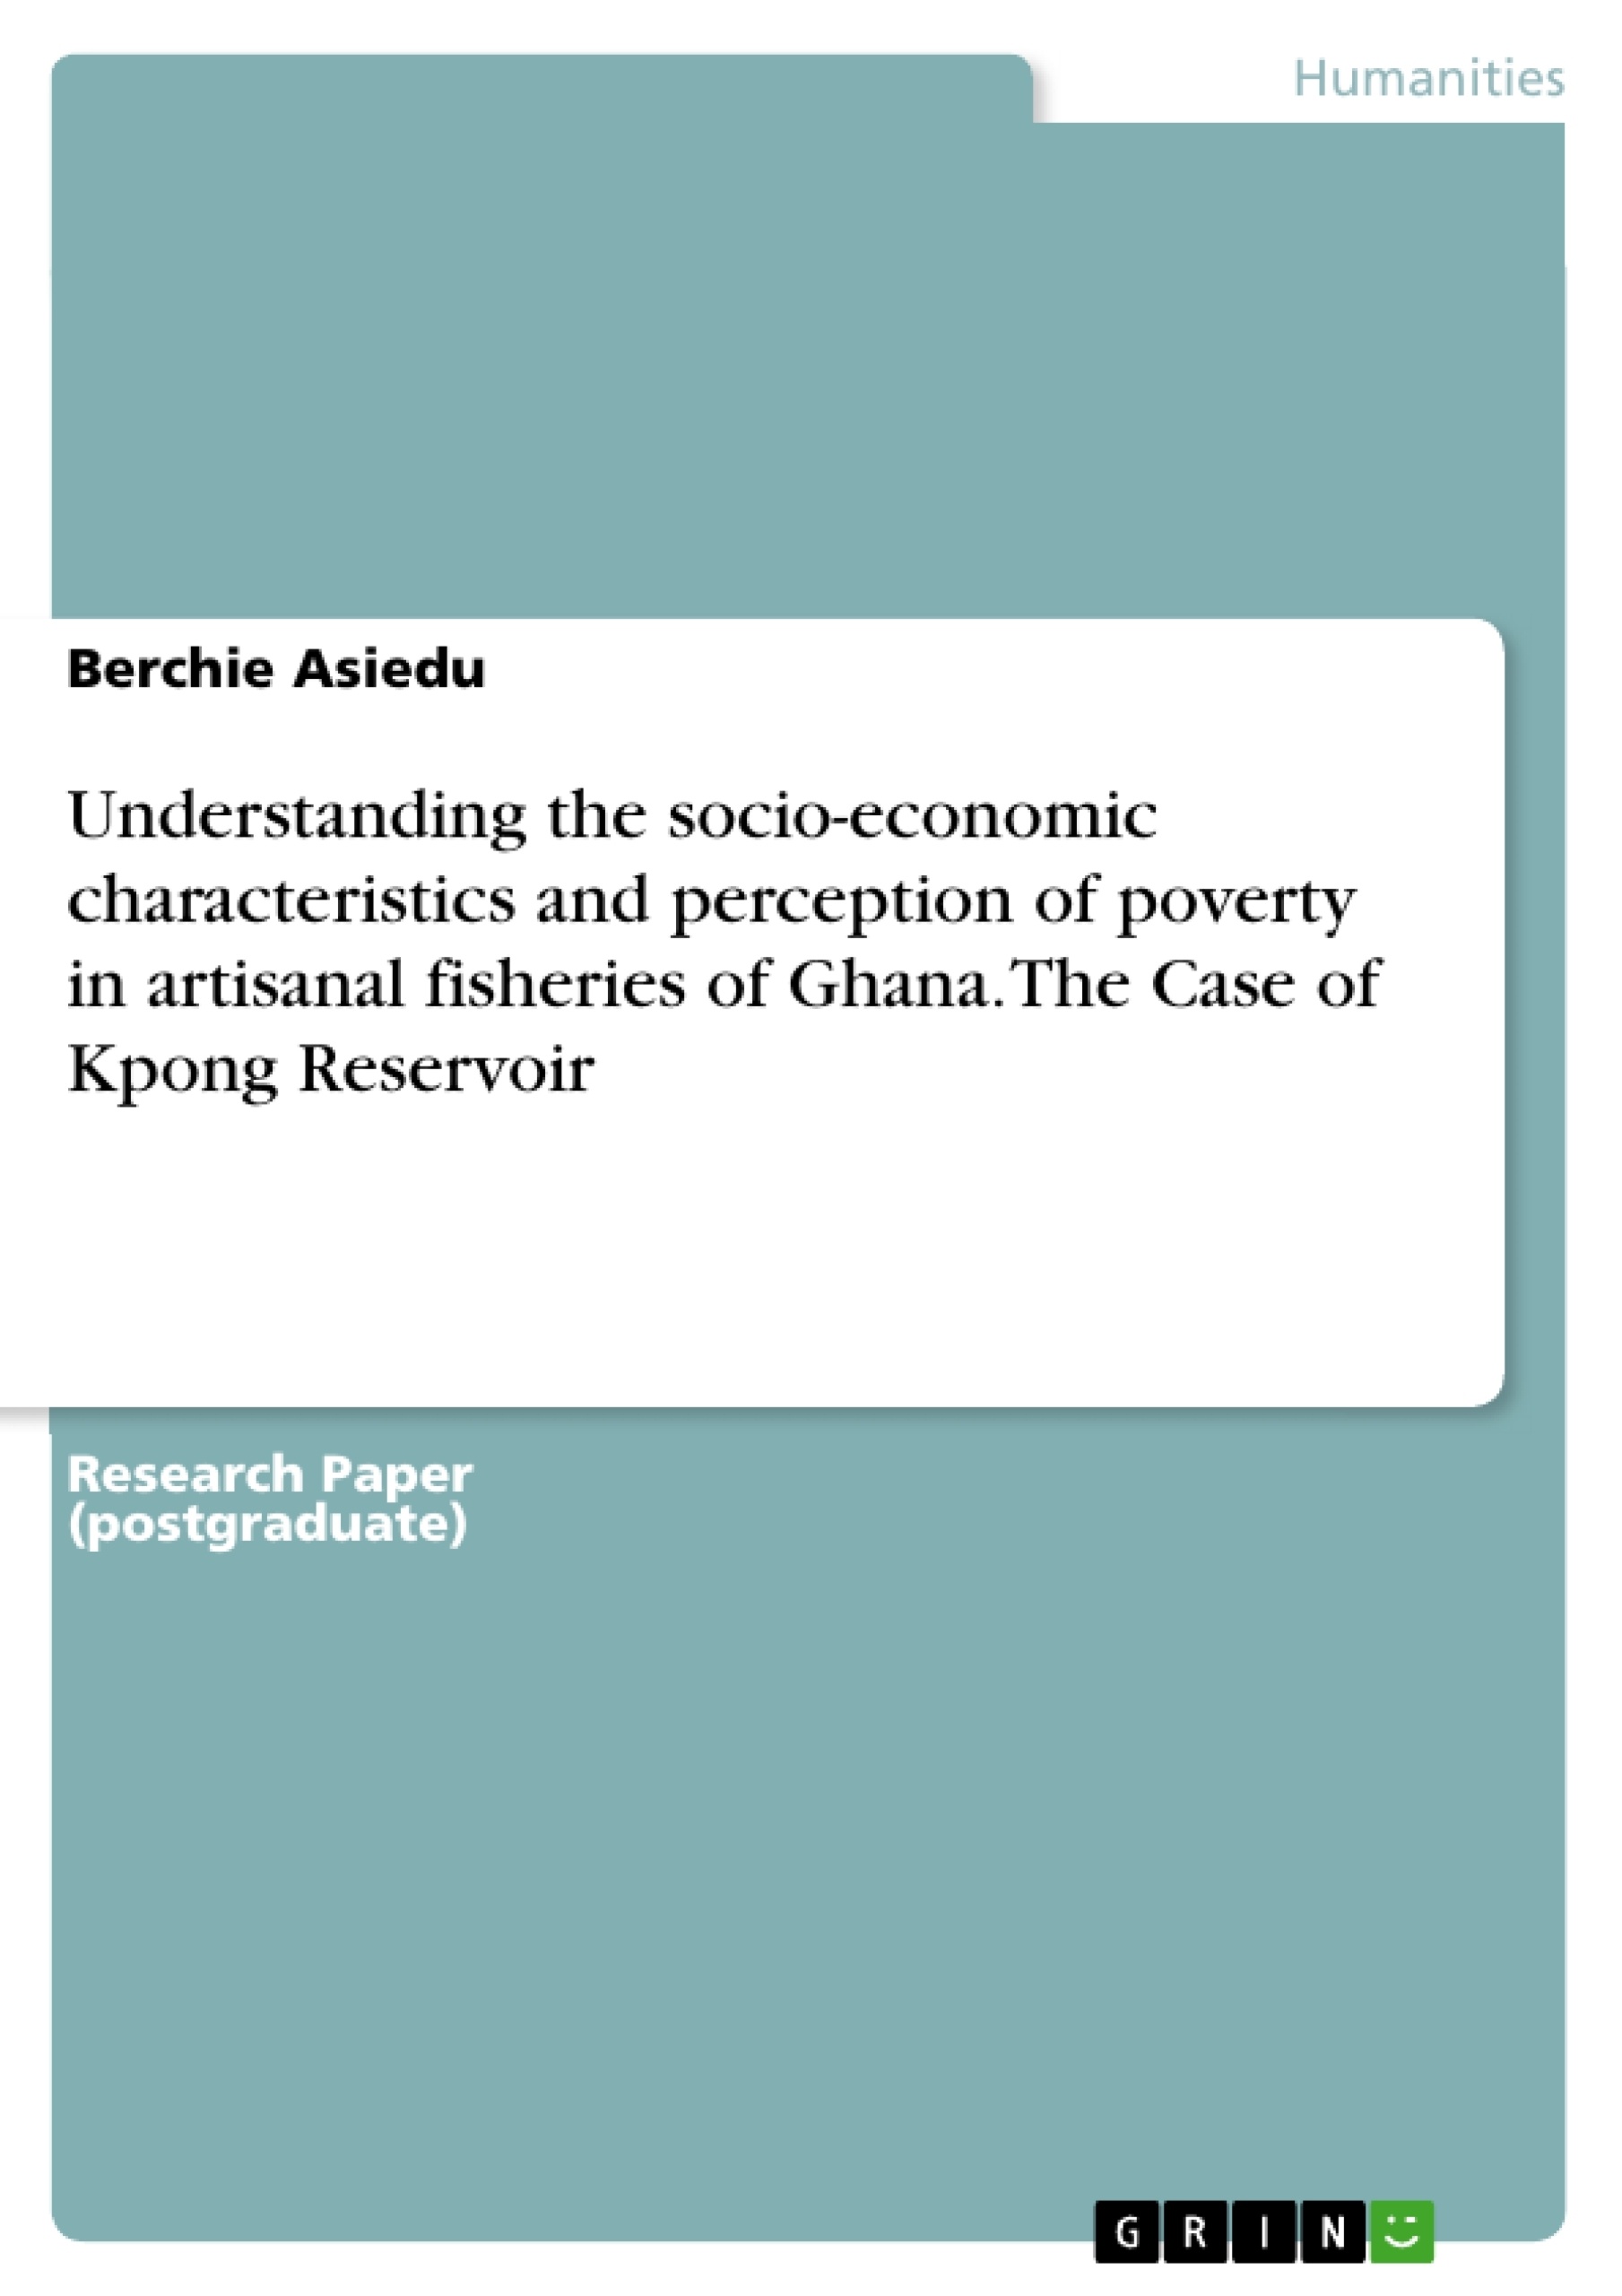 Title: Understanding the socio-economic characteristics and perception of poverty in artisanal fisheries of Ghana. The Case of Kpong Reservoir